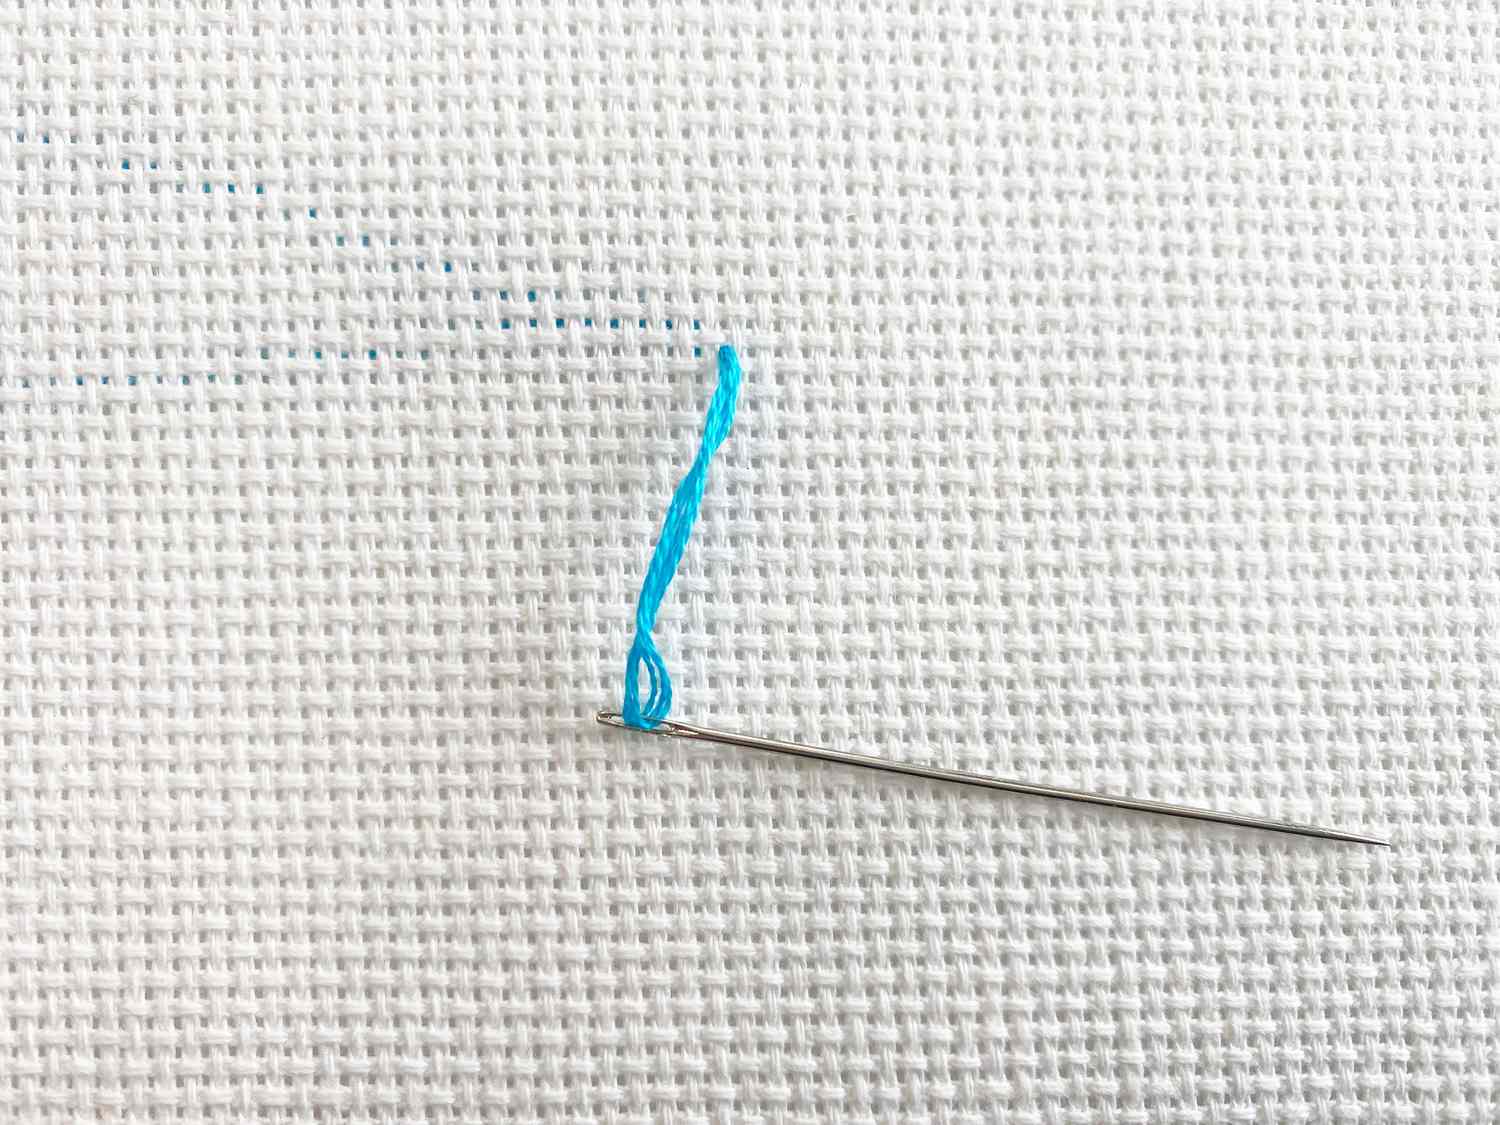 A close-up of blue thread in a needle with Aida cloth in the background